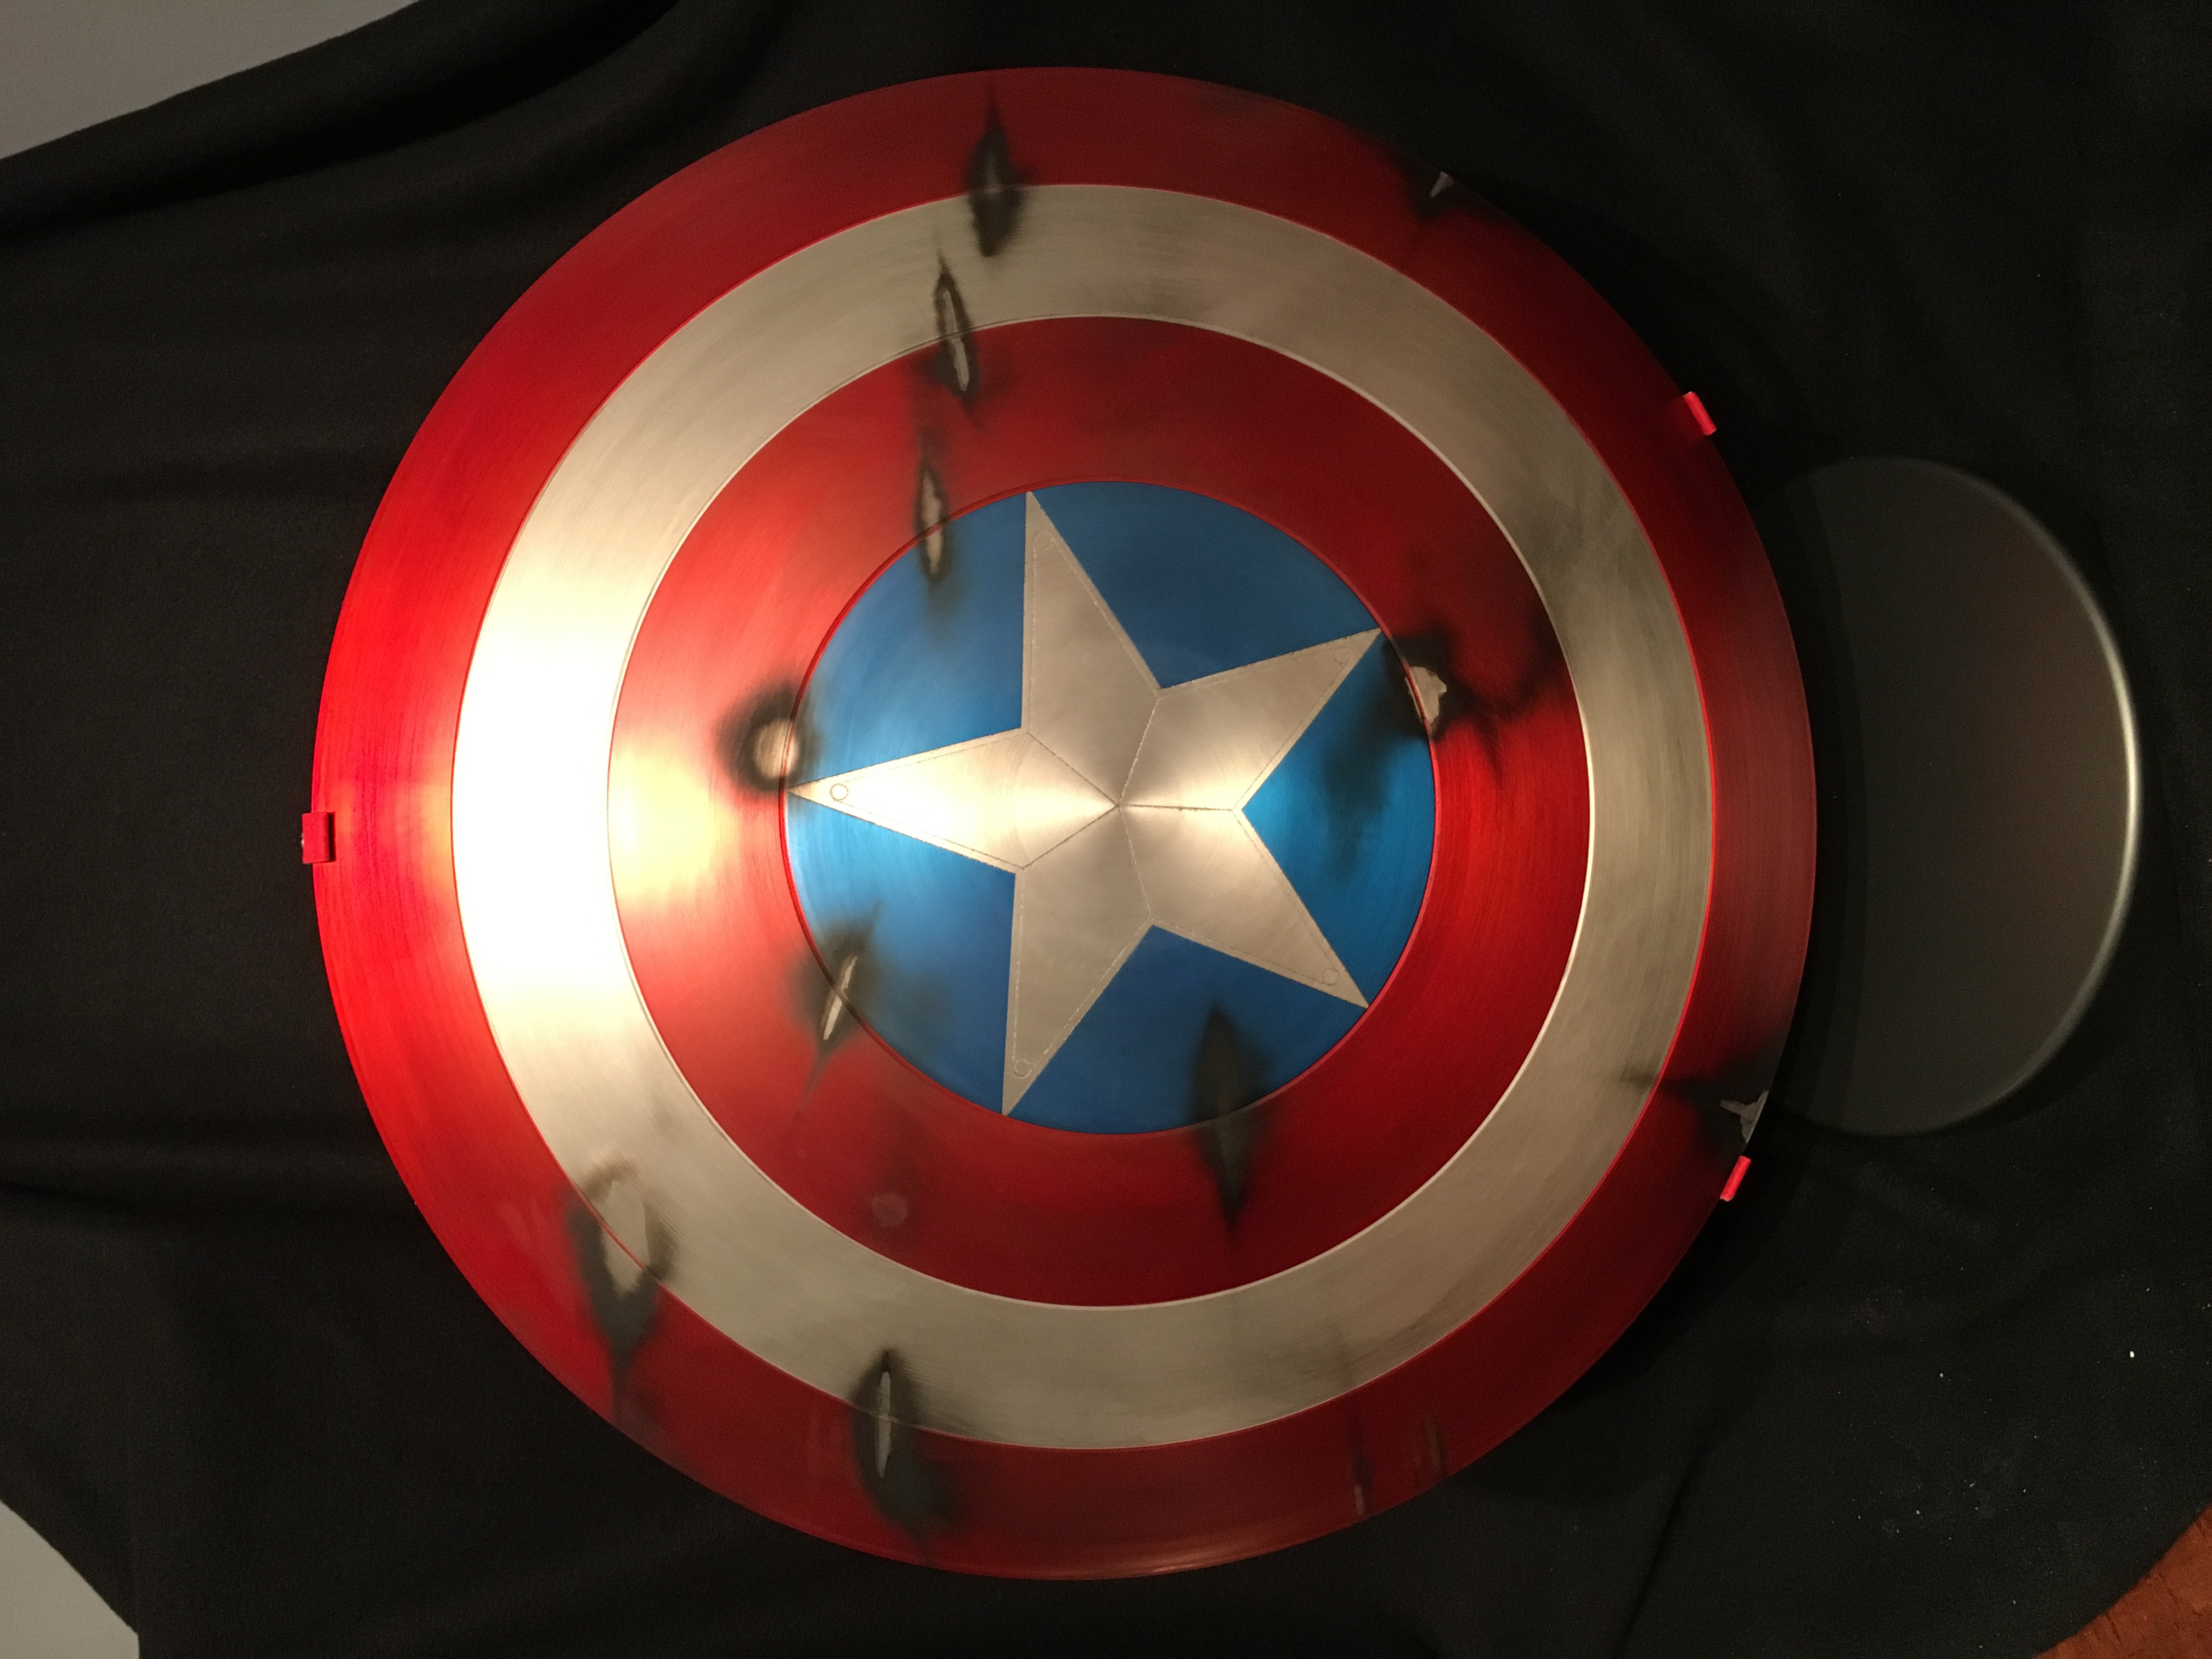 Captain America "The First Avenger" Battle Shield Shield by phebert Paint  and weathering by Artisan FX displayed in custom Artisan FX shield base |  RPF Costume and Prop Maker Community